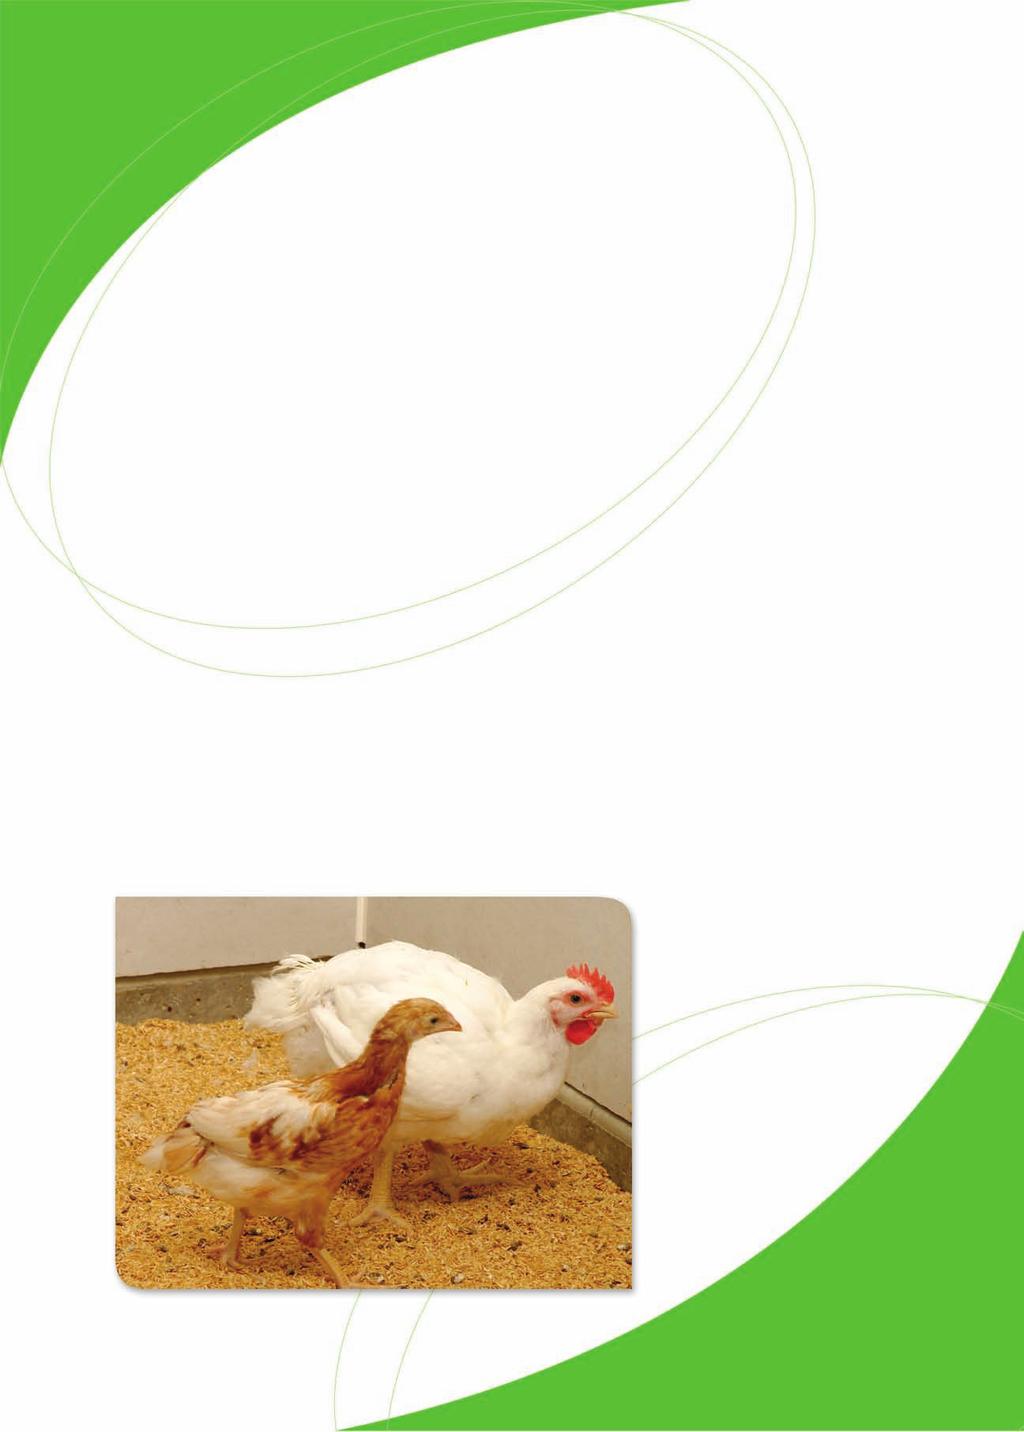 Attachment 1 SCHOOL PROJECT FACT SHEET BUSTING AN URBAN MYTH Australian chickens are larger today, but not due to the addition of hormones.